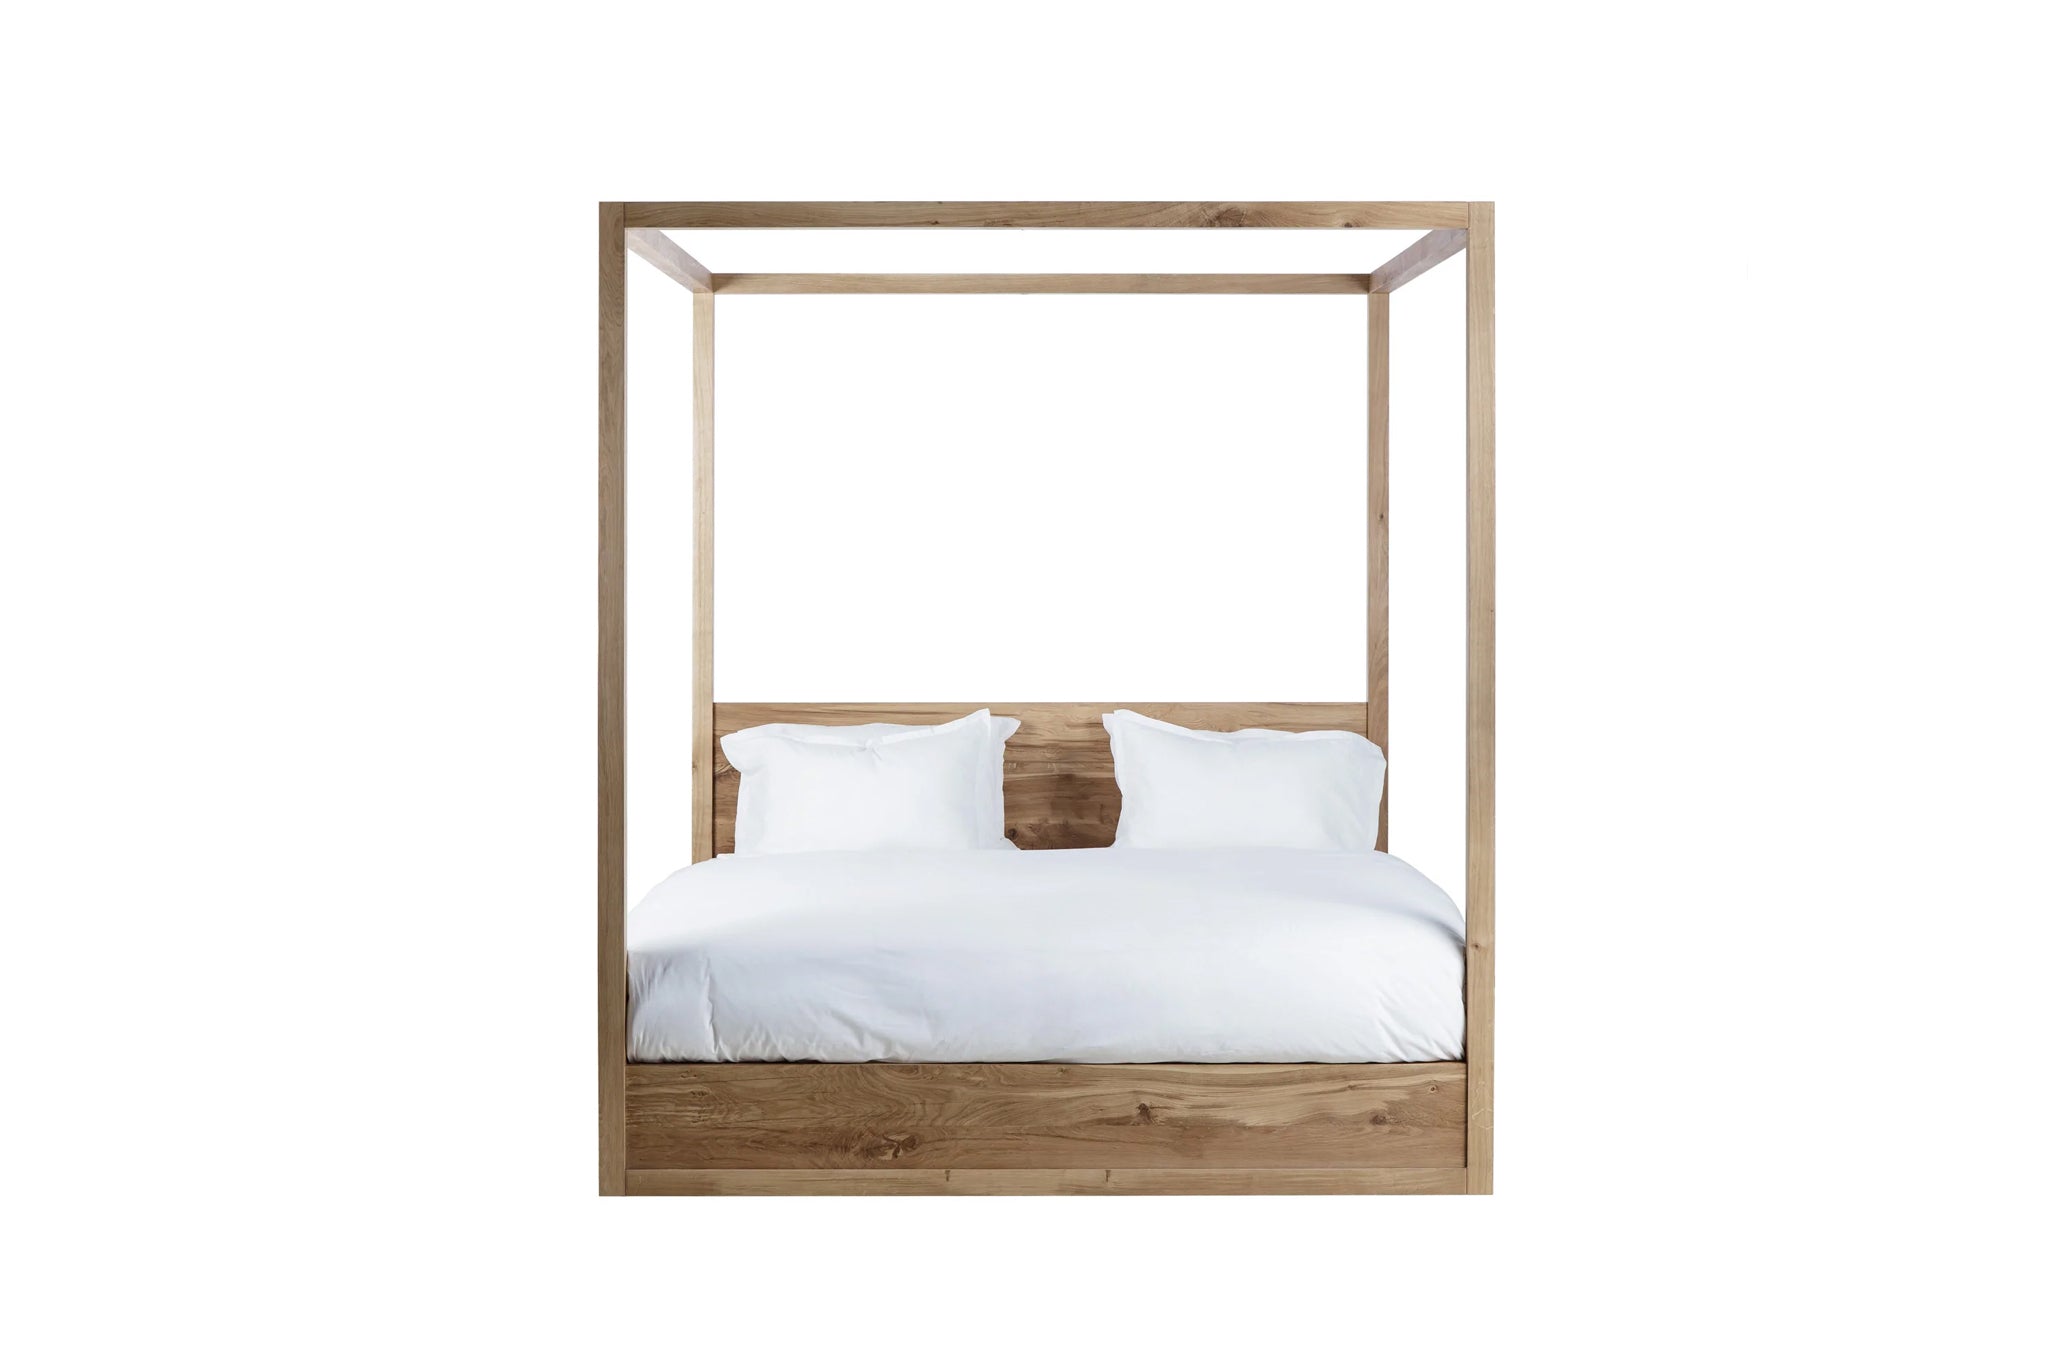 Arlo Reclaimed French Oak 4 Poster Bed – Queen